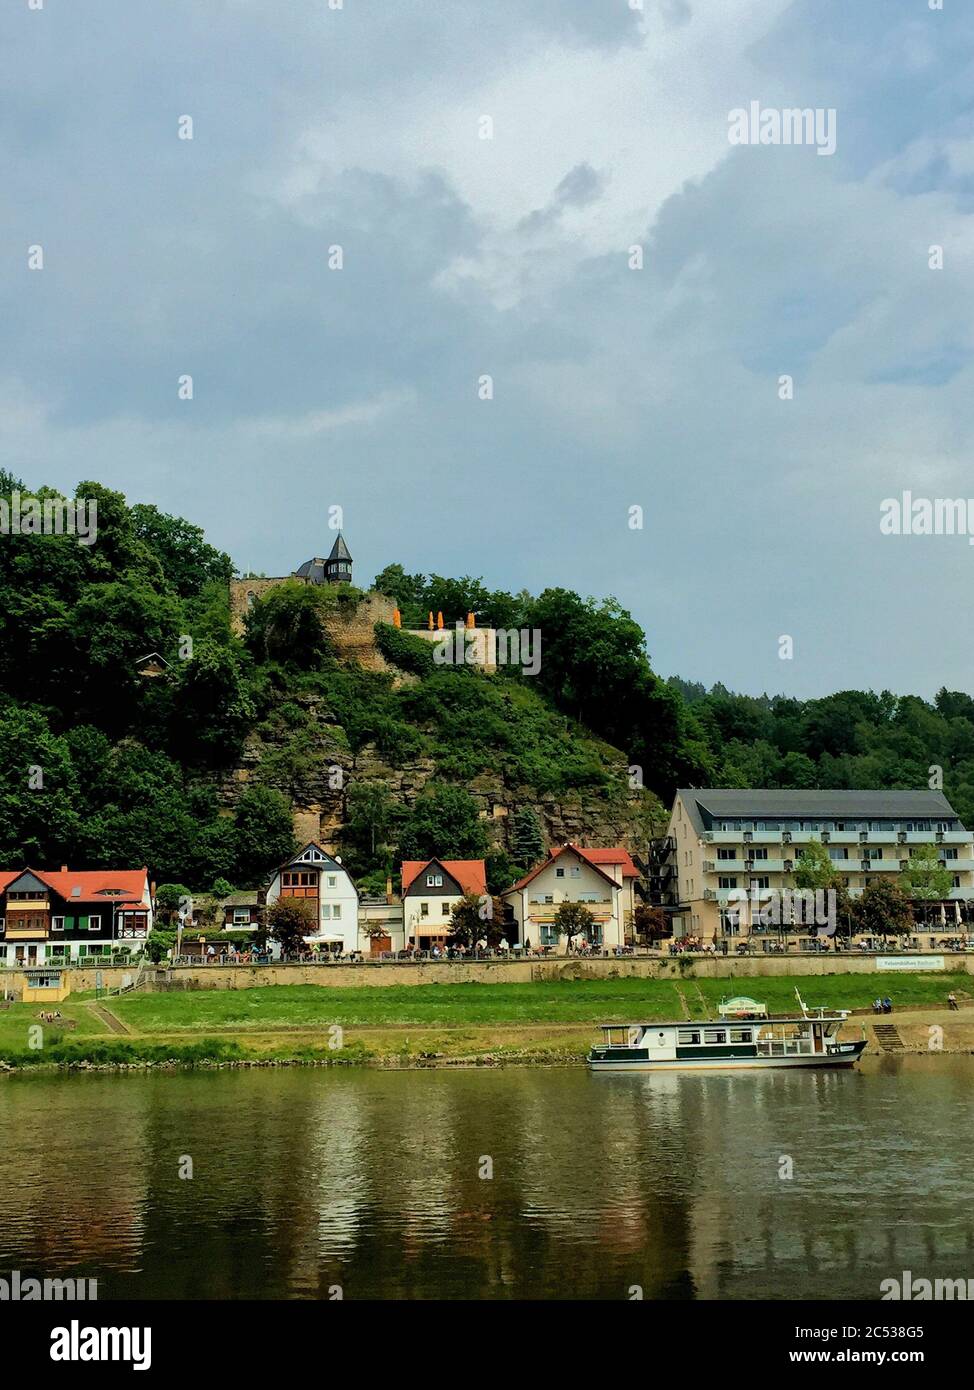 Boat trip on the Elbe river in Germany Stock Photo